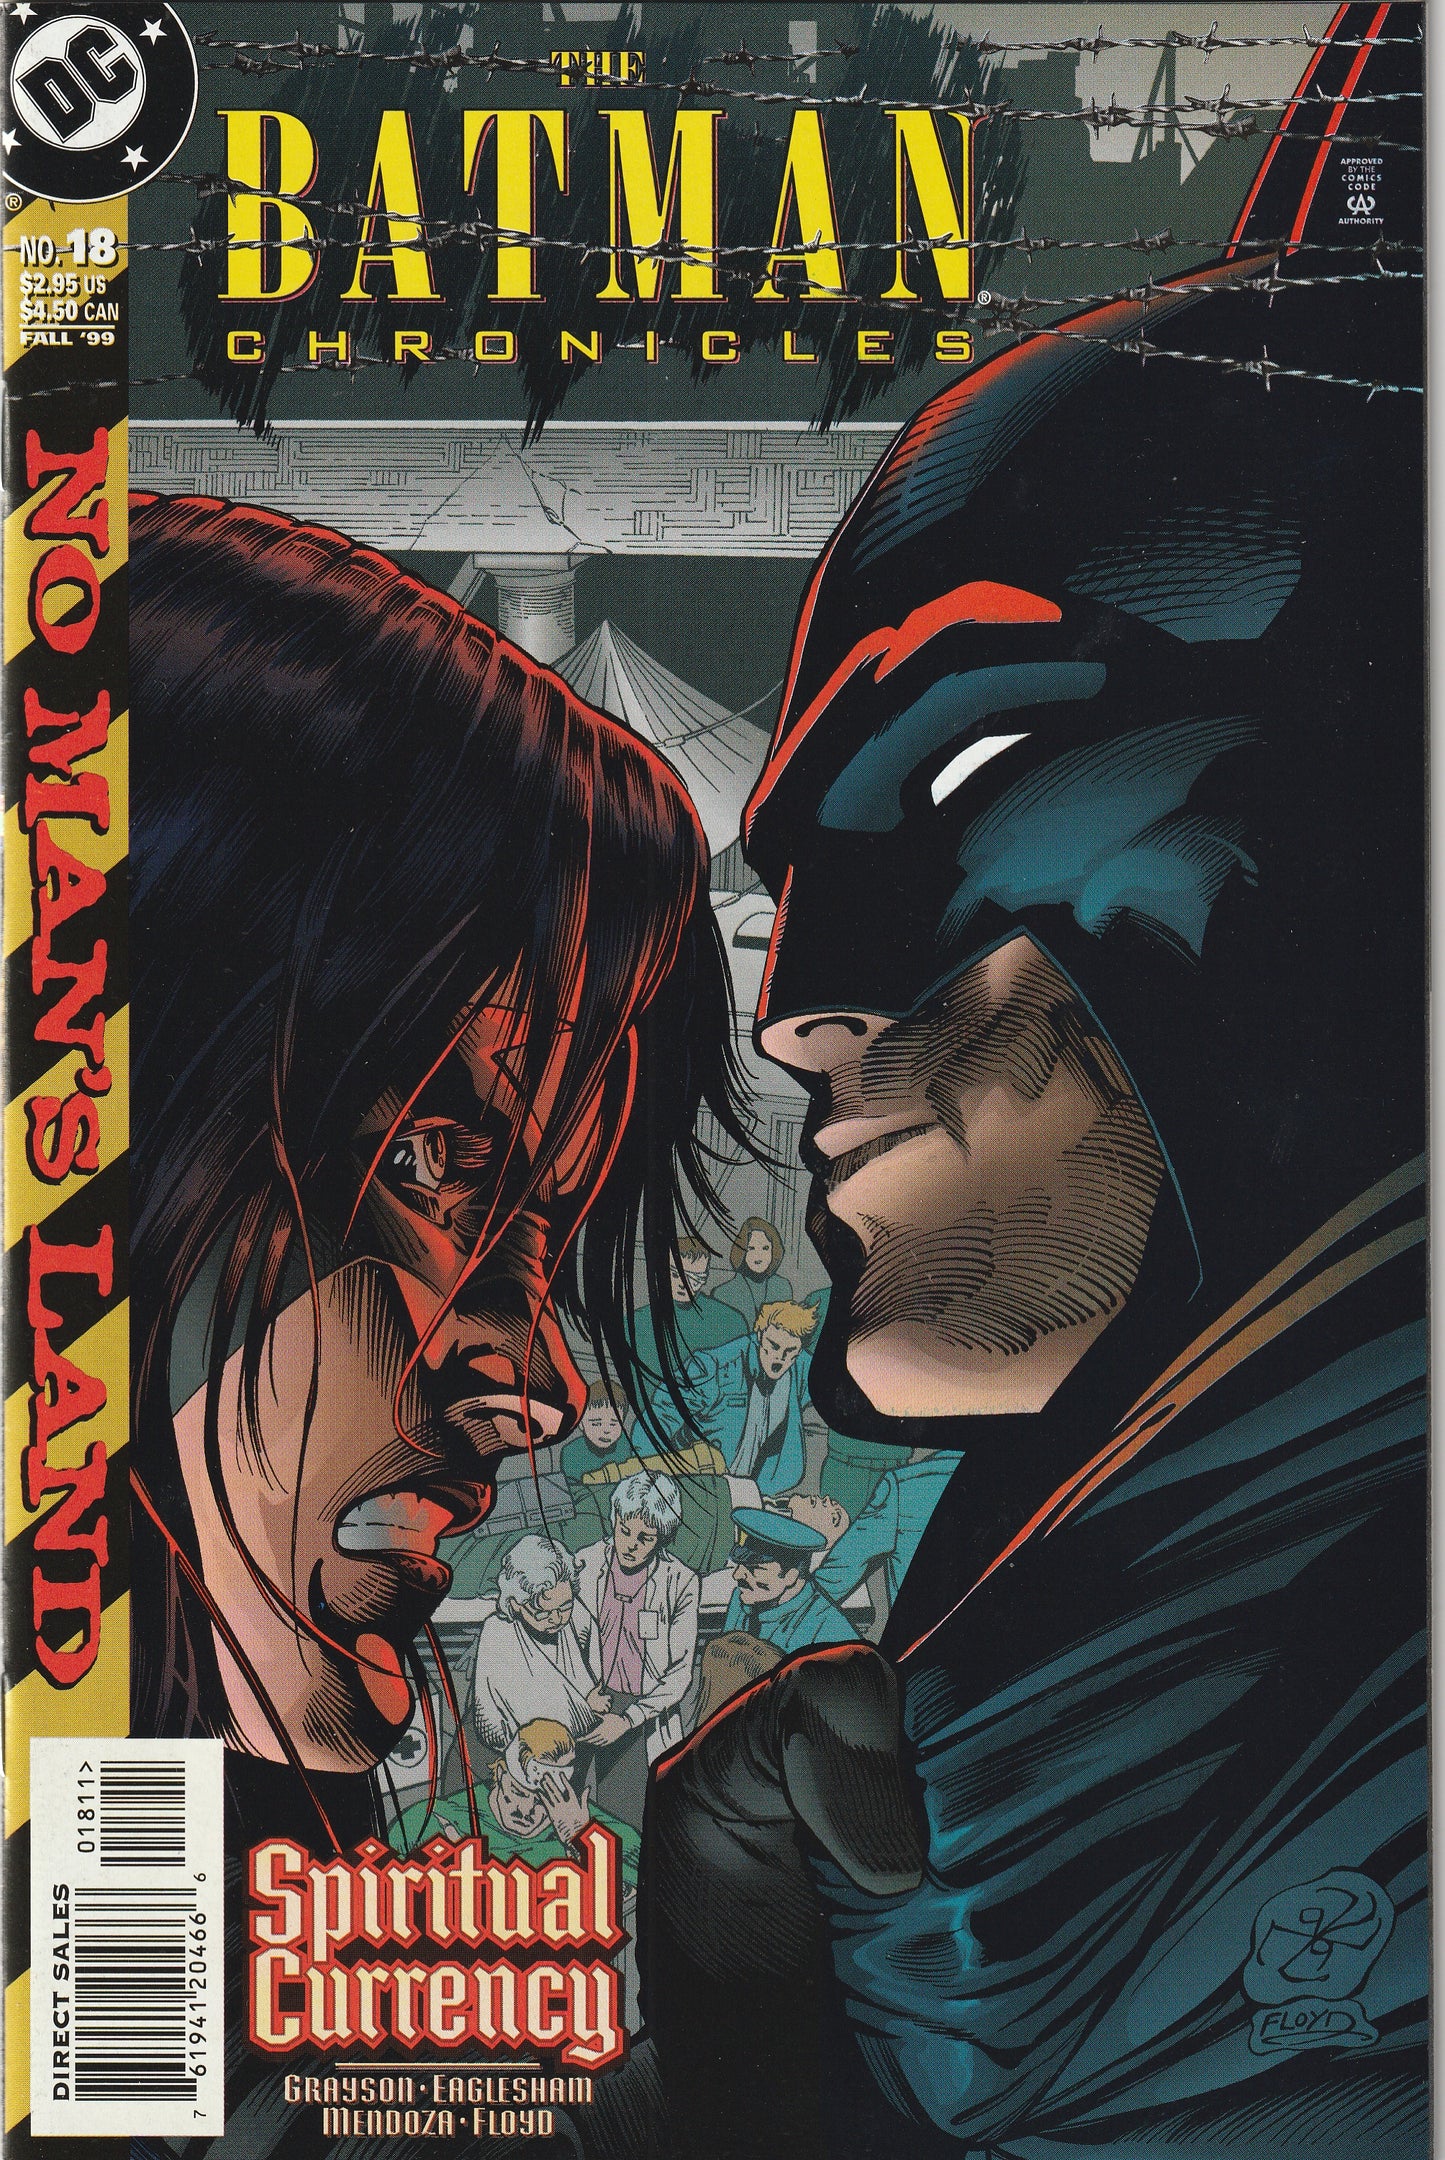 The Batman Chronicles #18 (1999) - No Man's Land tie-in